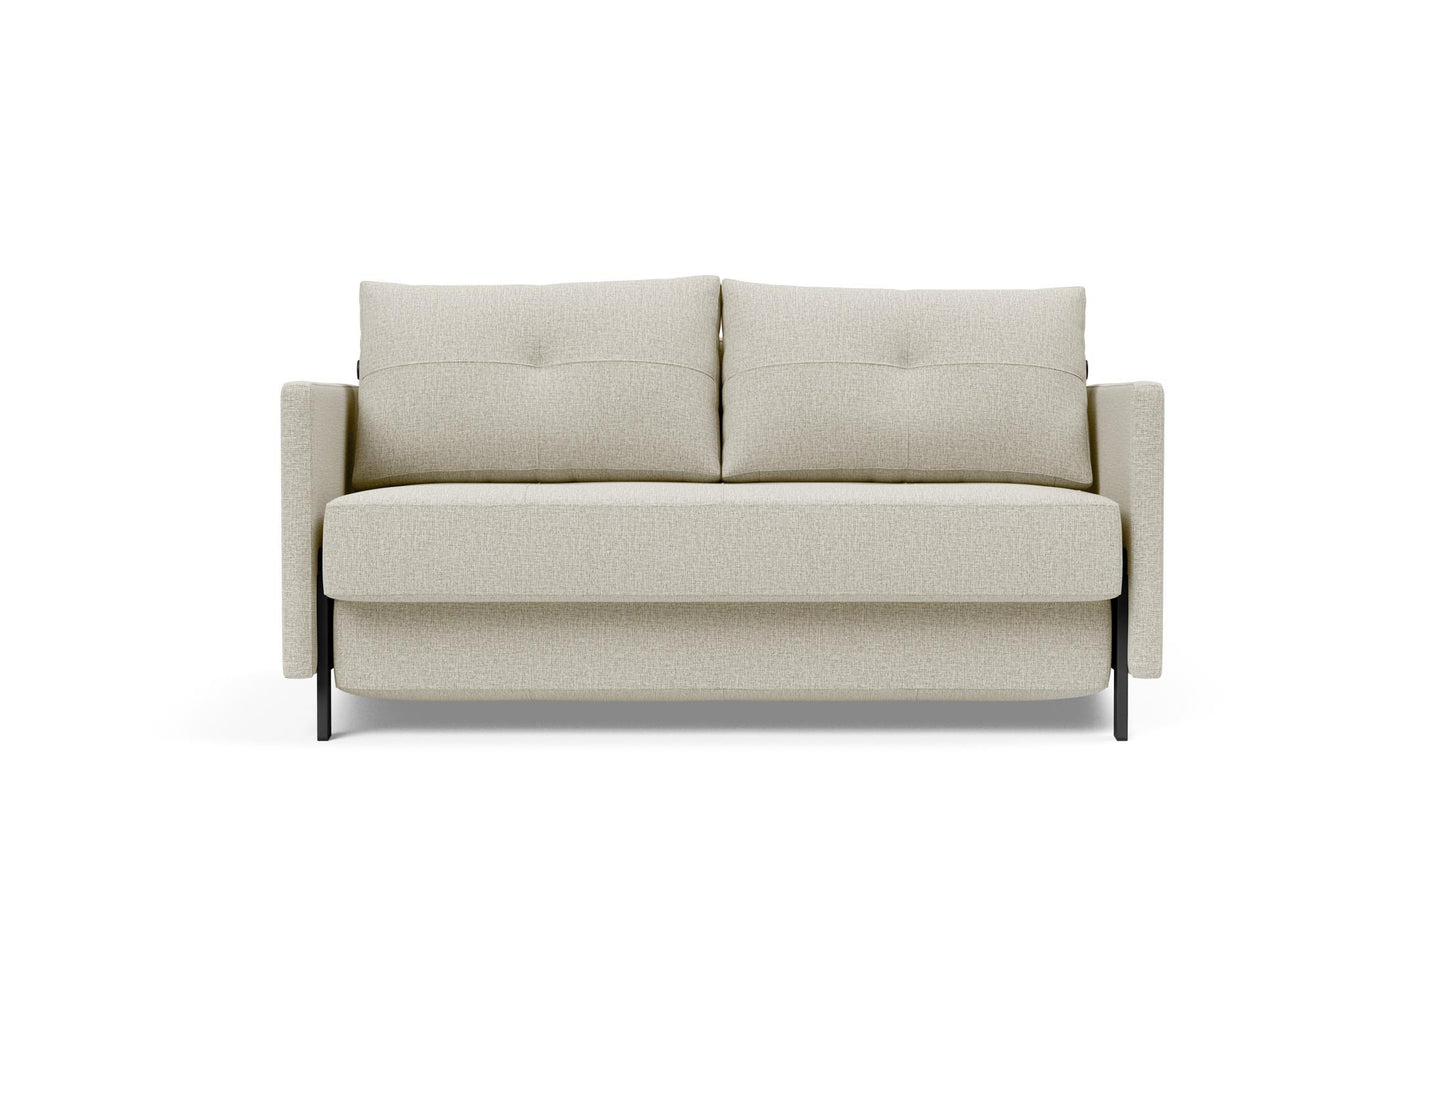 Cubed Sofa - Full size, with Arms